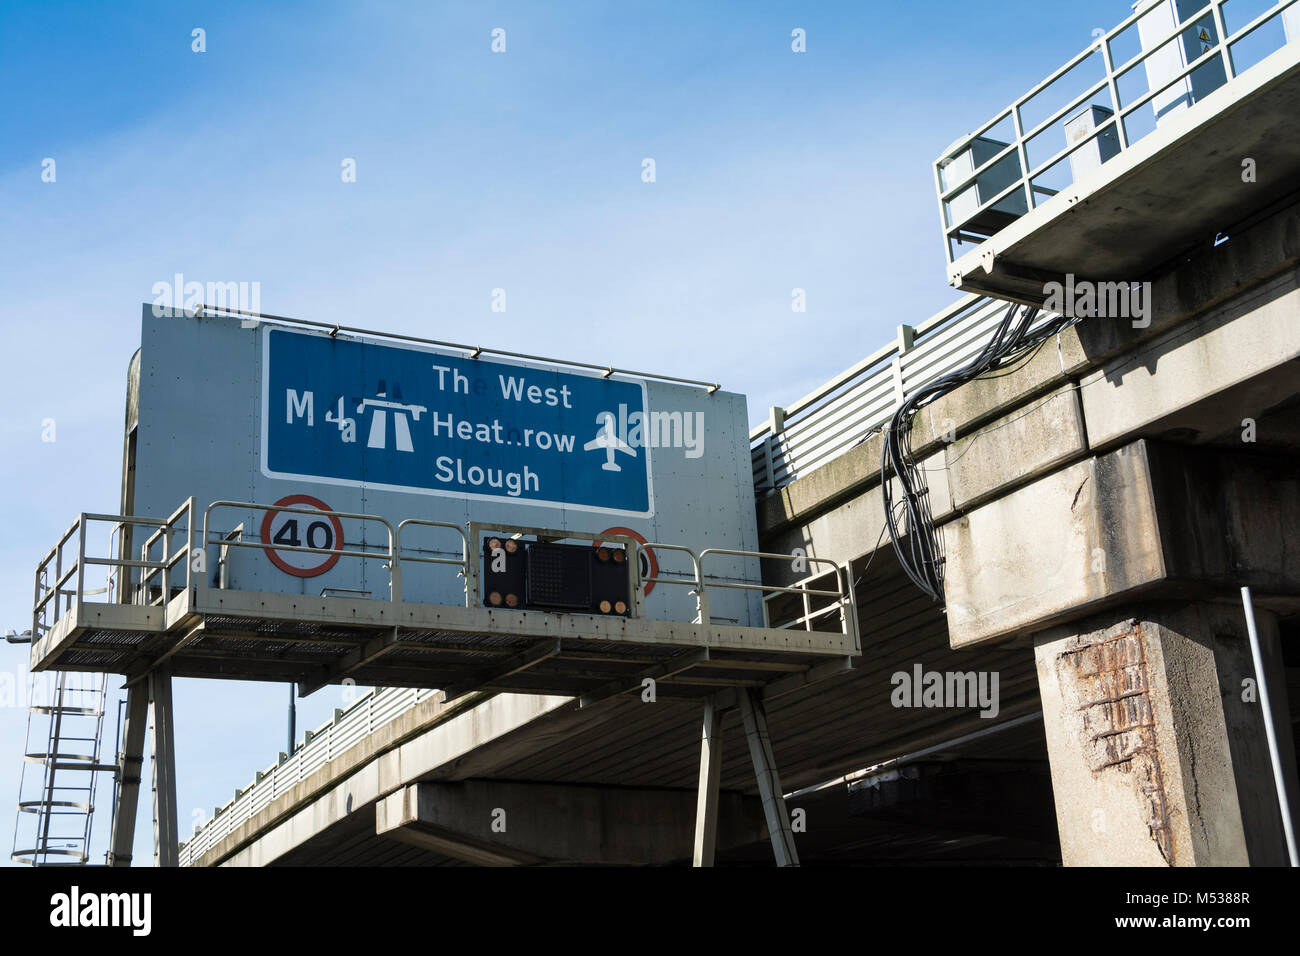 The A4/M4 Chiswick Flyover in west London, UK Stock Photo